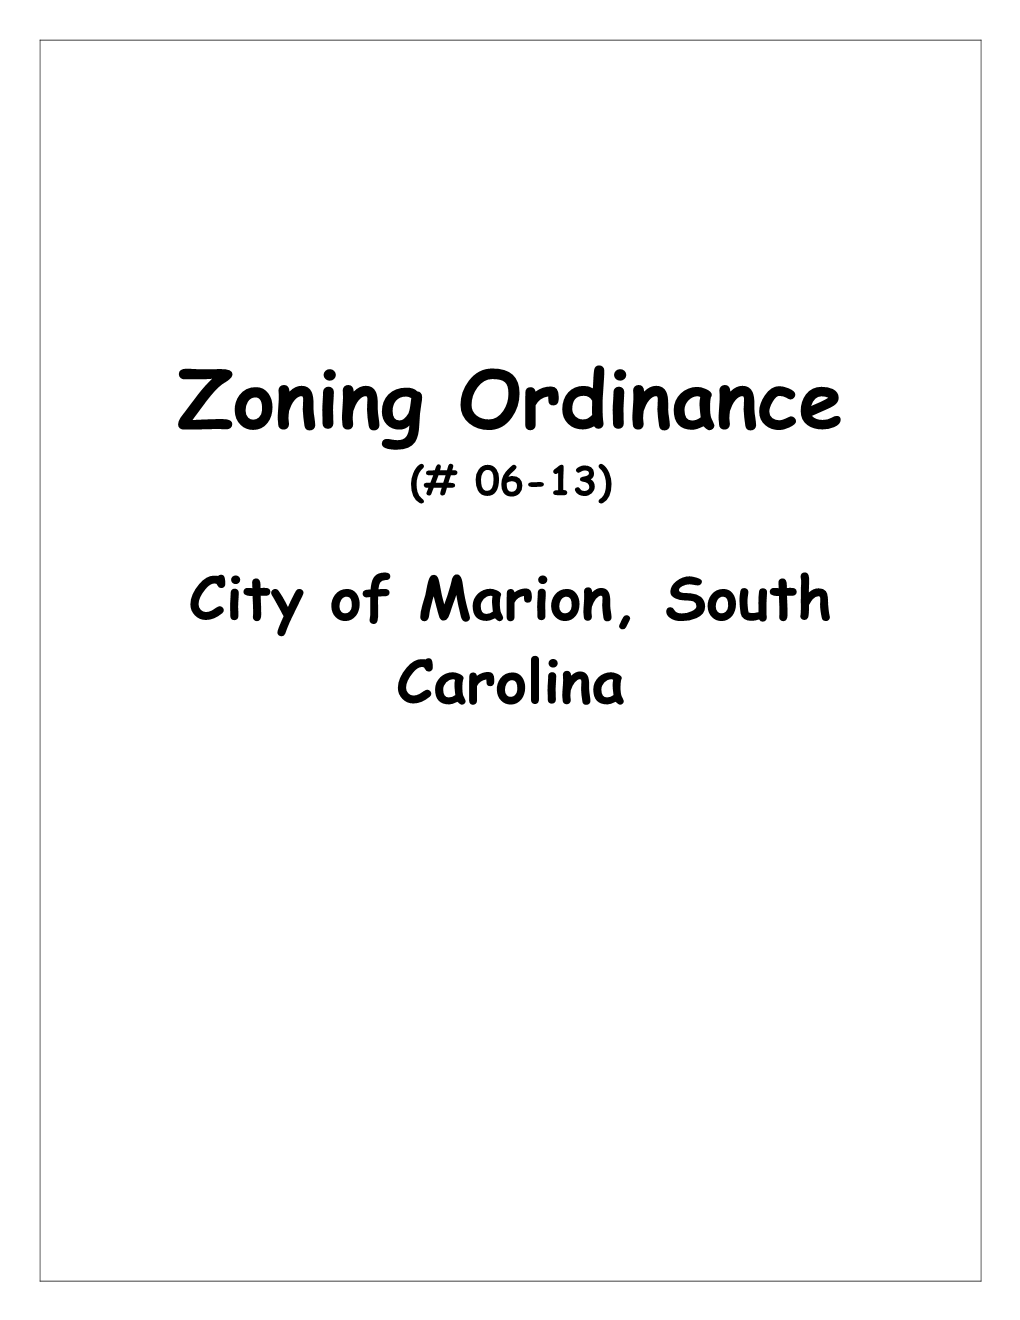 Article I.Establishment of Zoning Districts,Purpose of Districts, and Rules Forthe